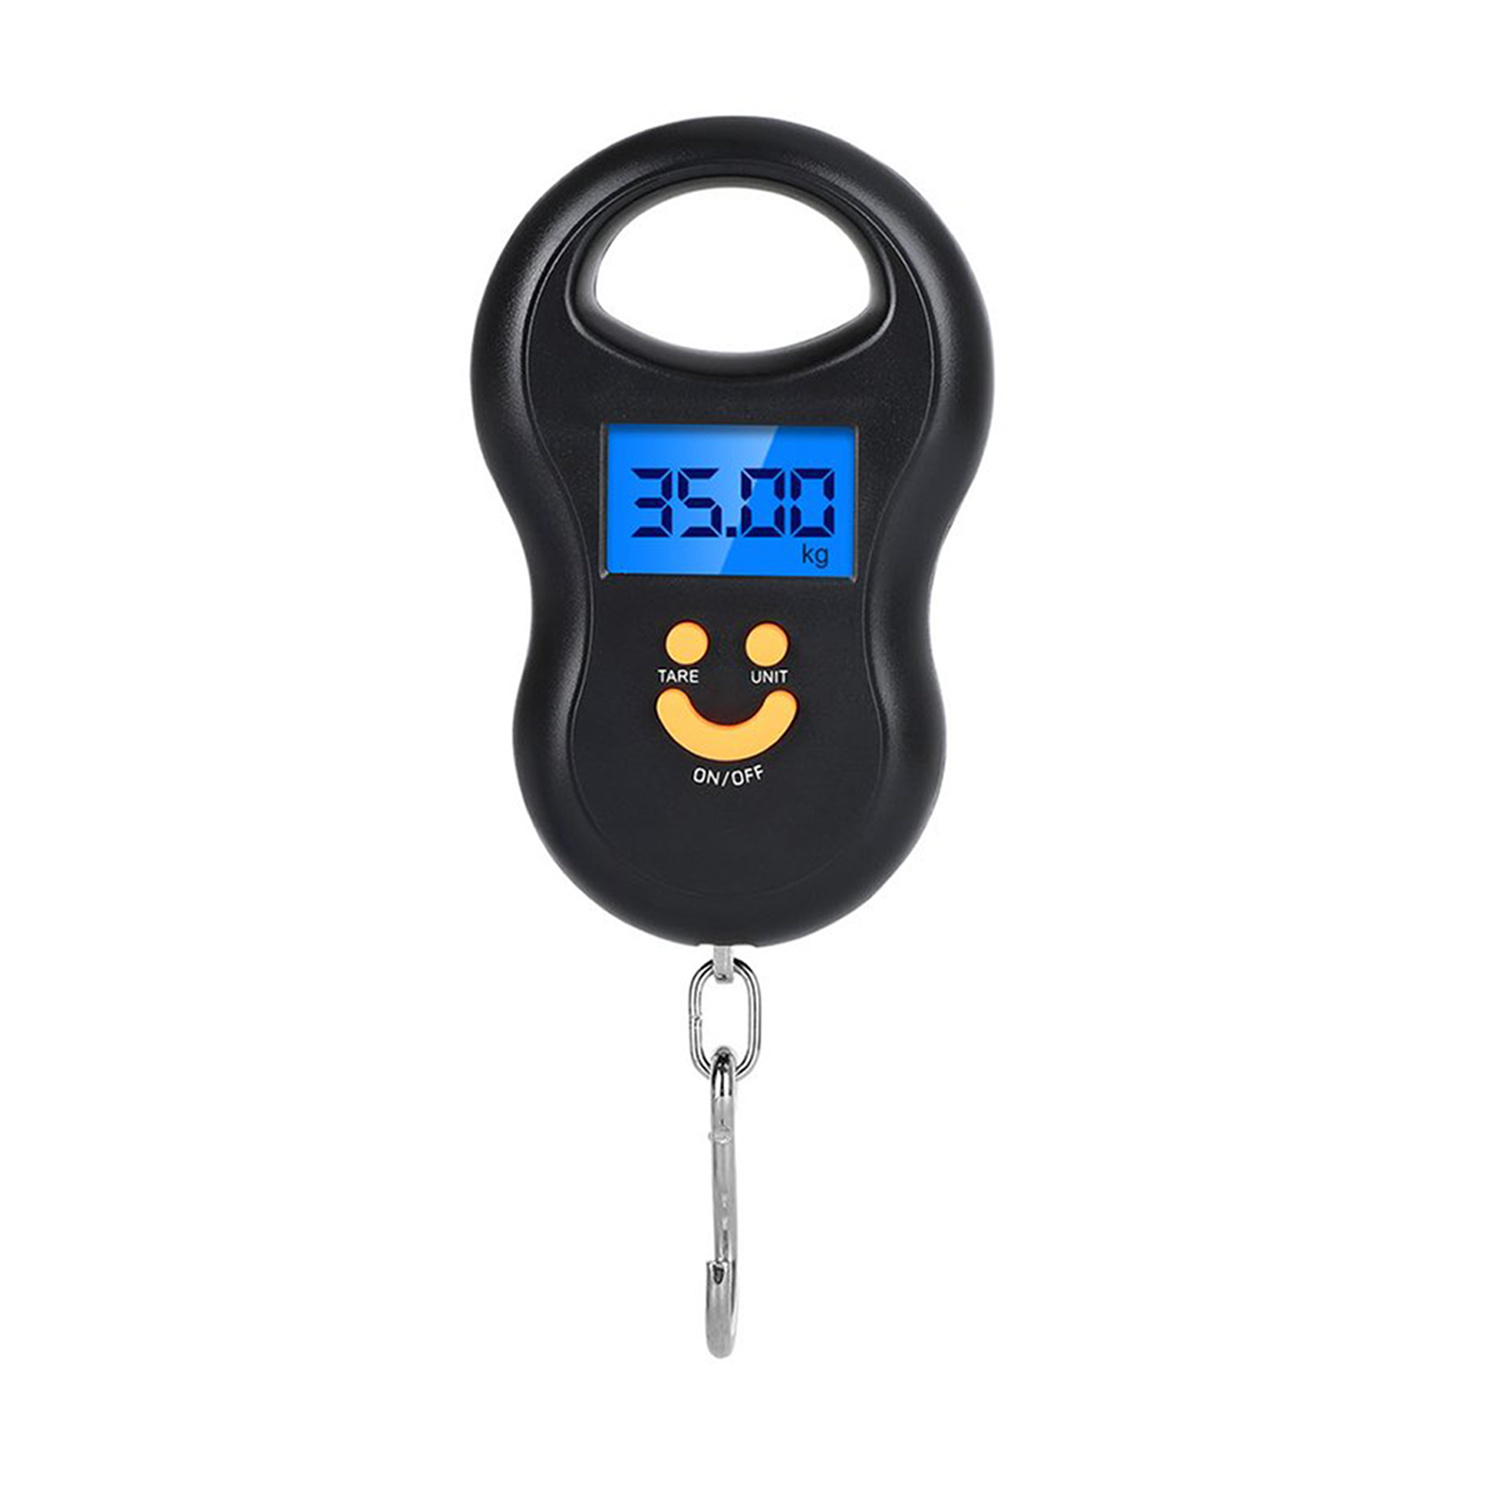 50Kg/110lb Digital Hanging Scale with LCD Display & Backlight - Perfect for  Fishing, Luggage & More!